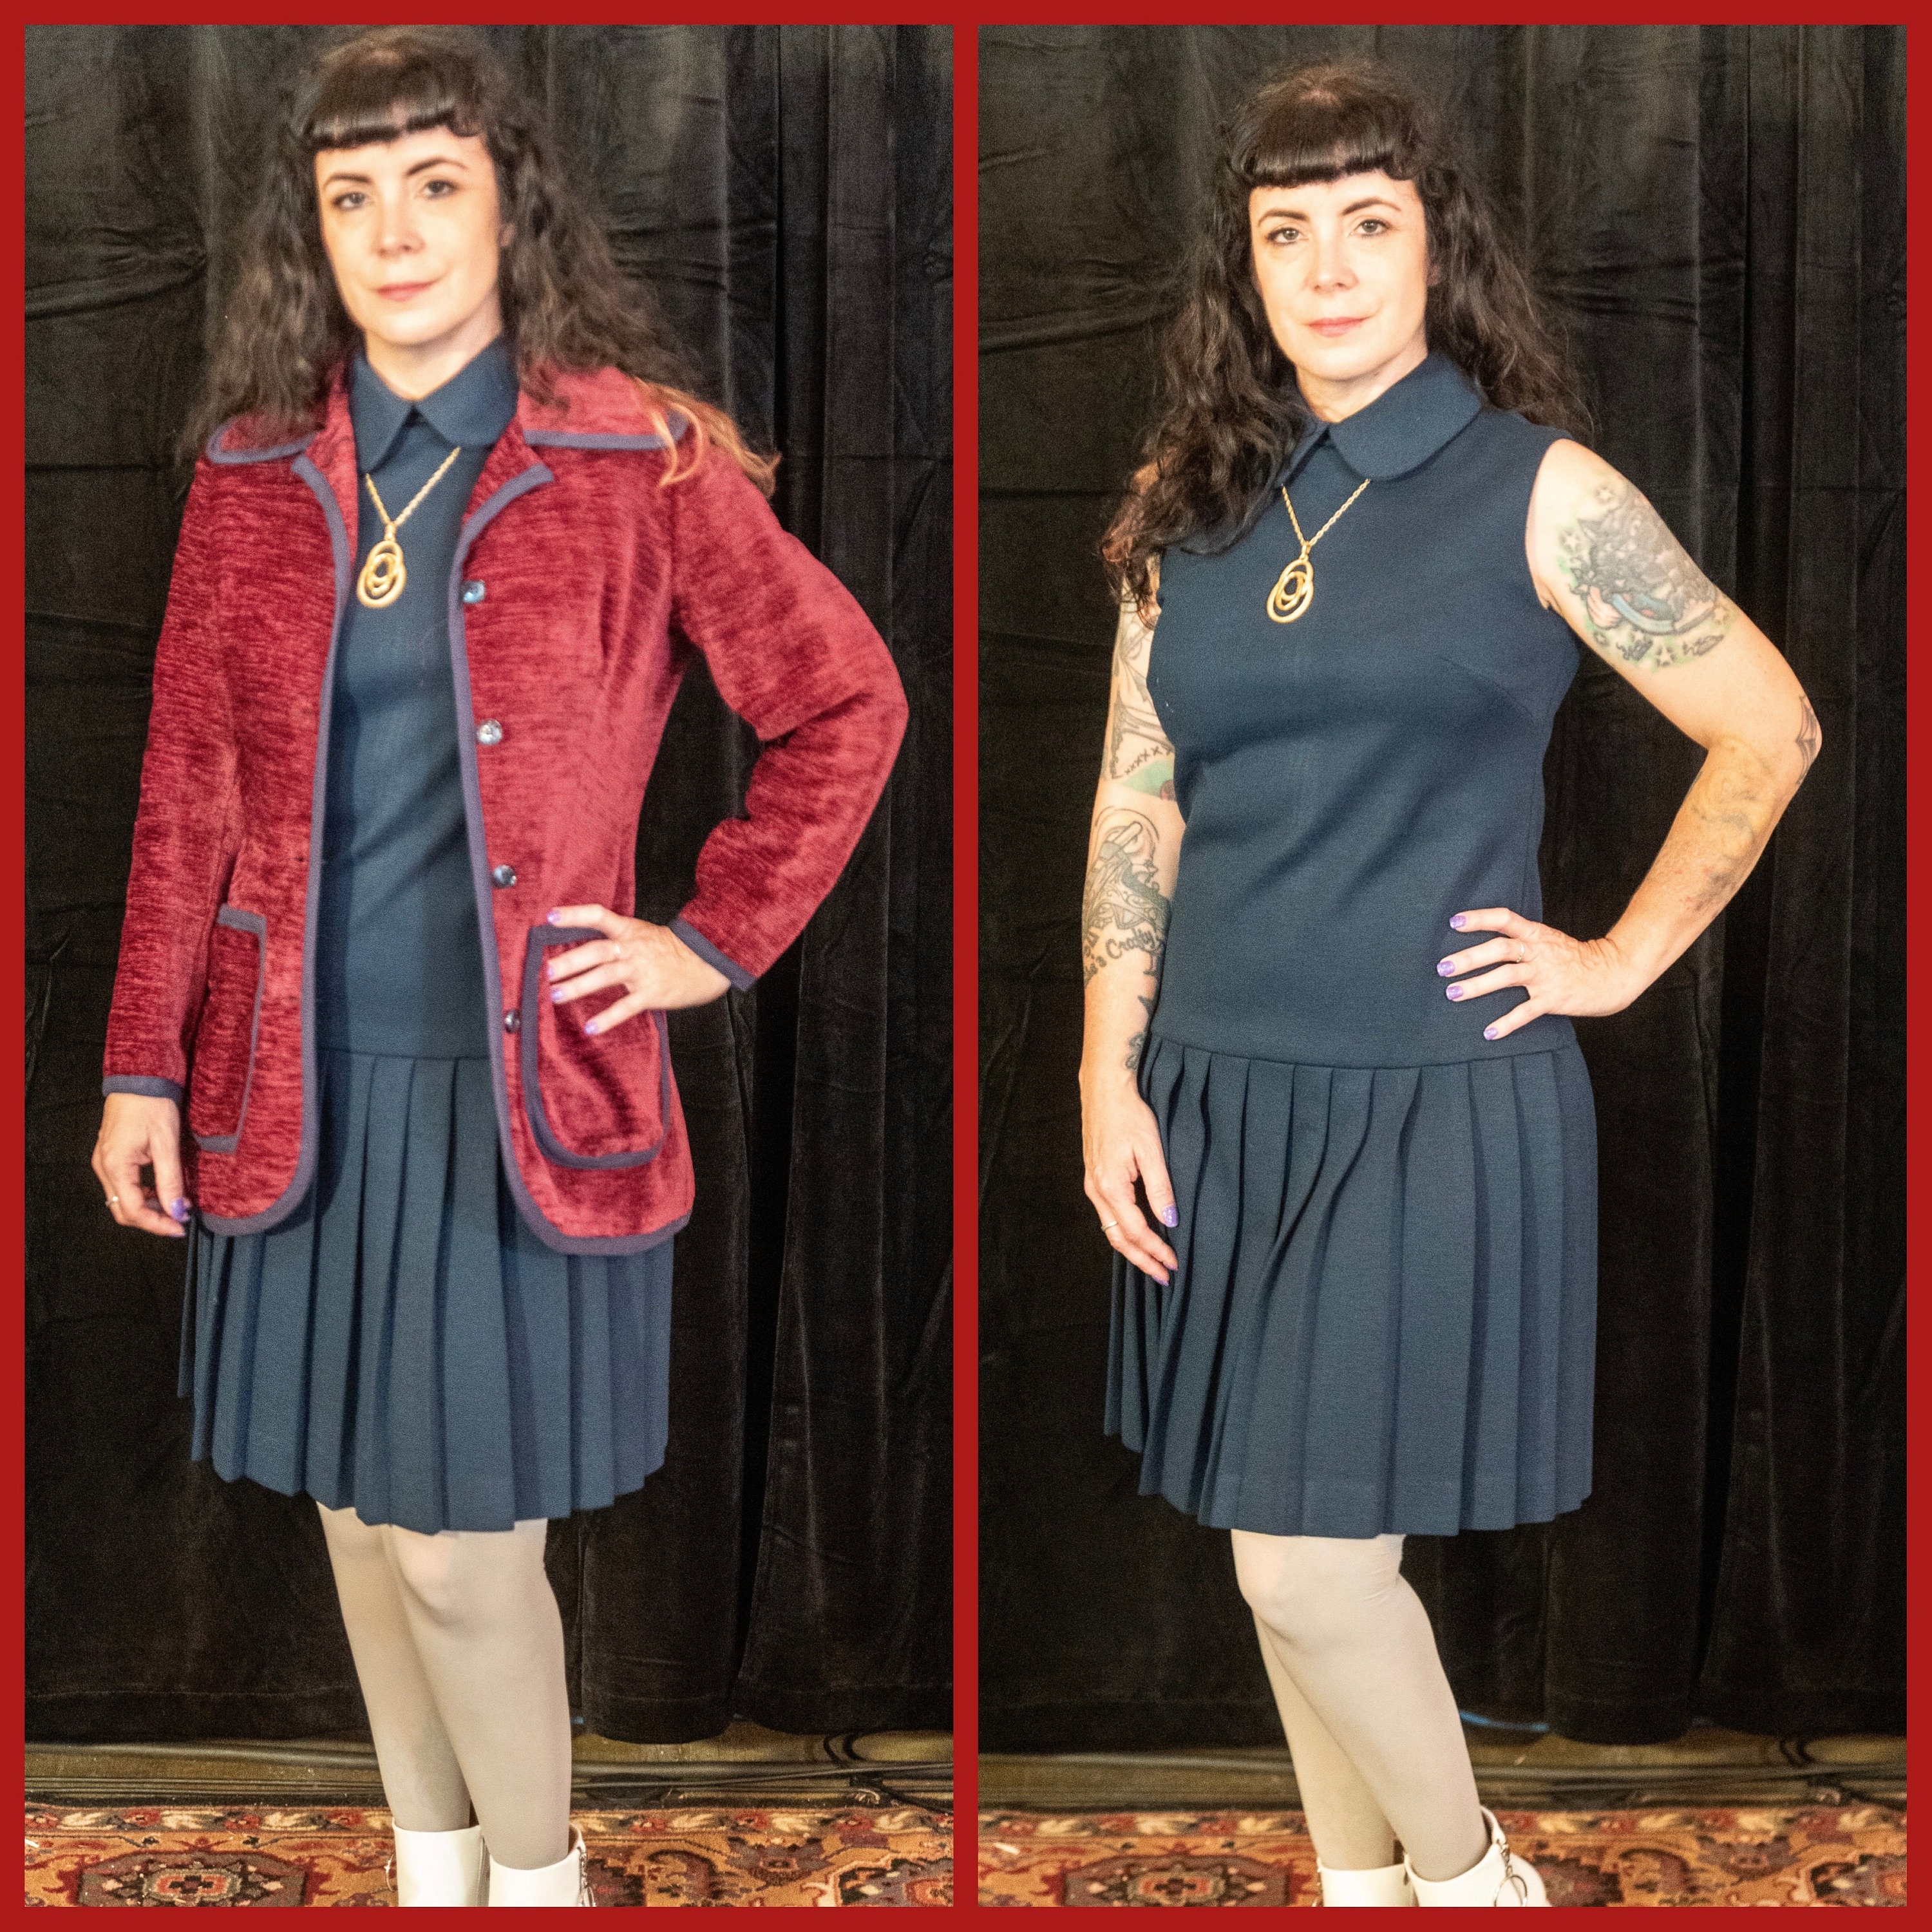 60s -70s Jewelry – Necklaces, Earrings, Rings, Bracelets 1960S Dress With Jacket Dark Blue Drop Waist Pleated Skirt Peter Pan Collar Sleeveless Red Chenille Pockets $115.00 AT vintagedancer.com